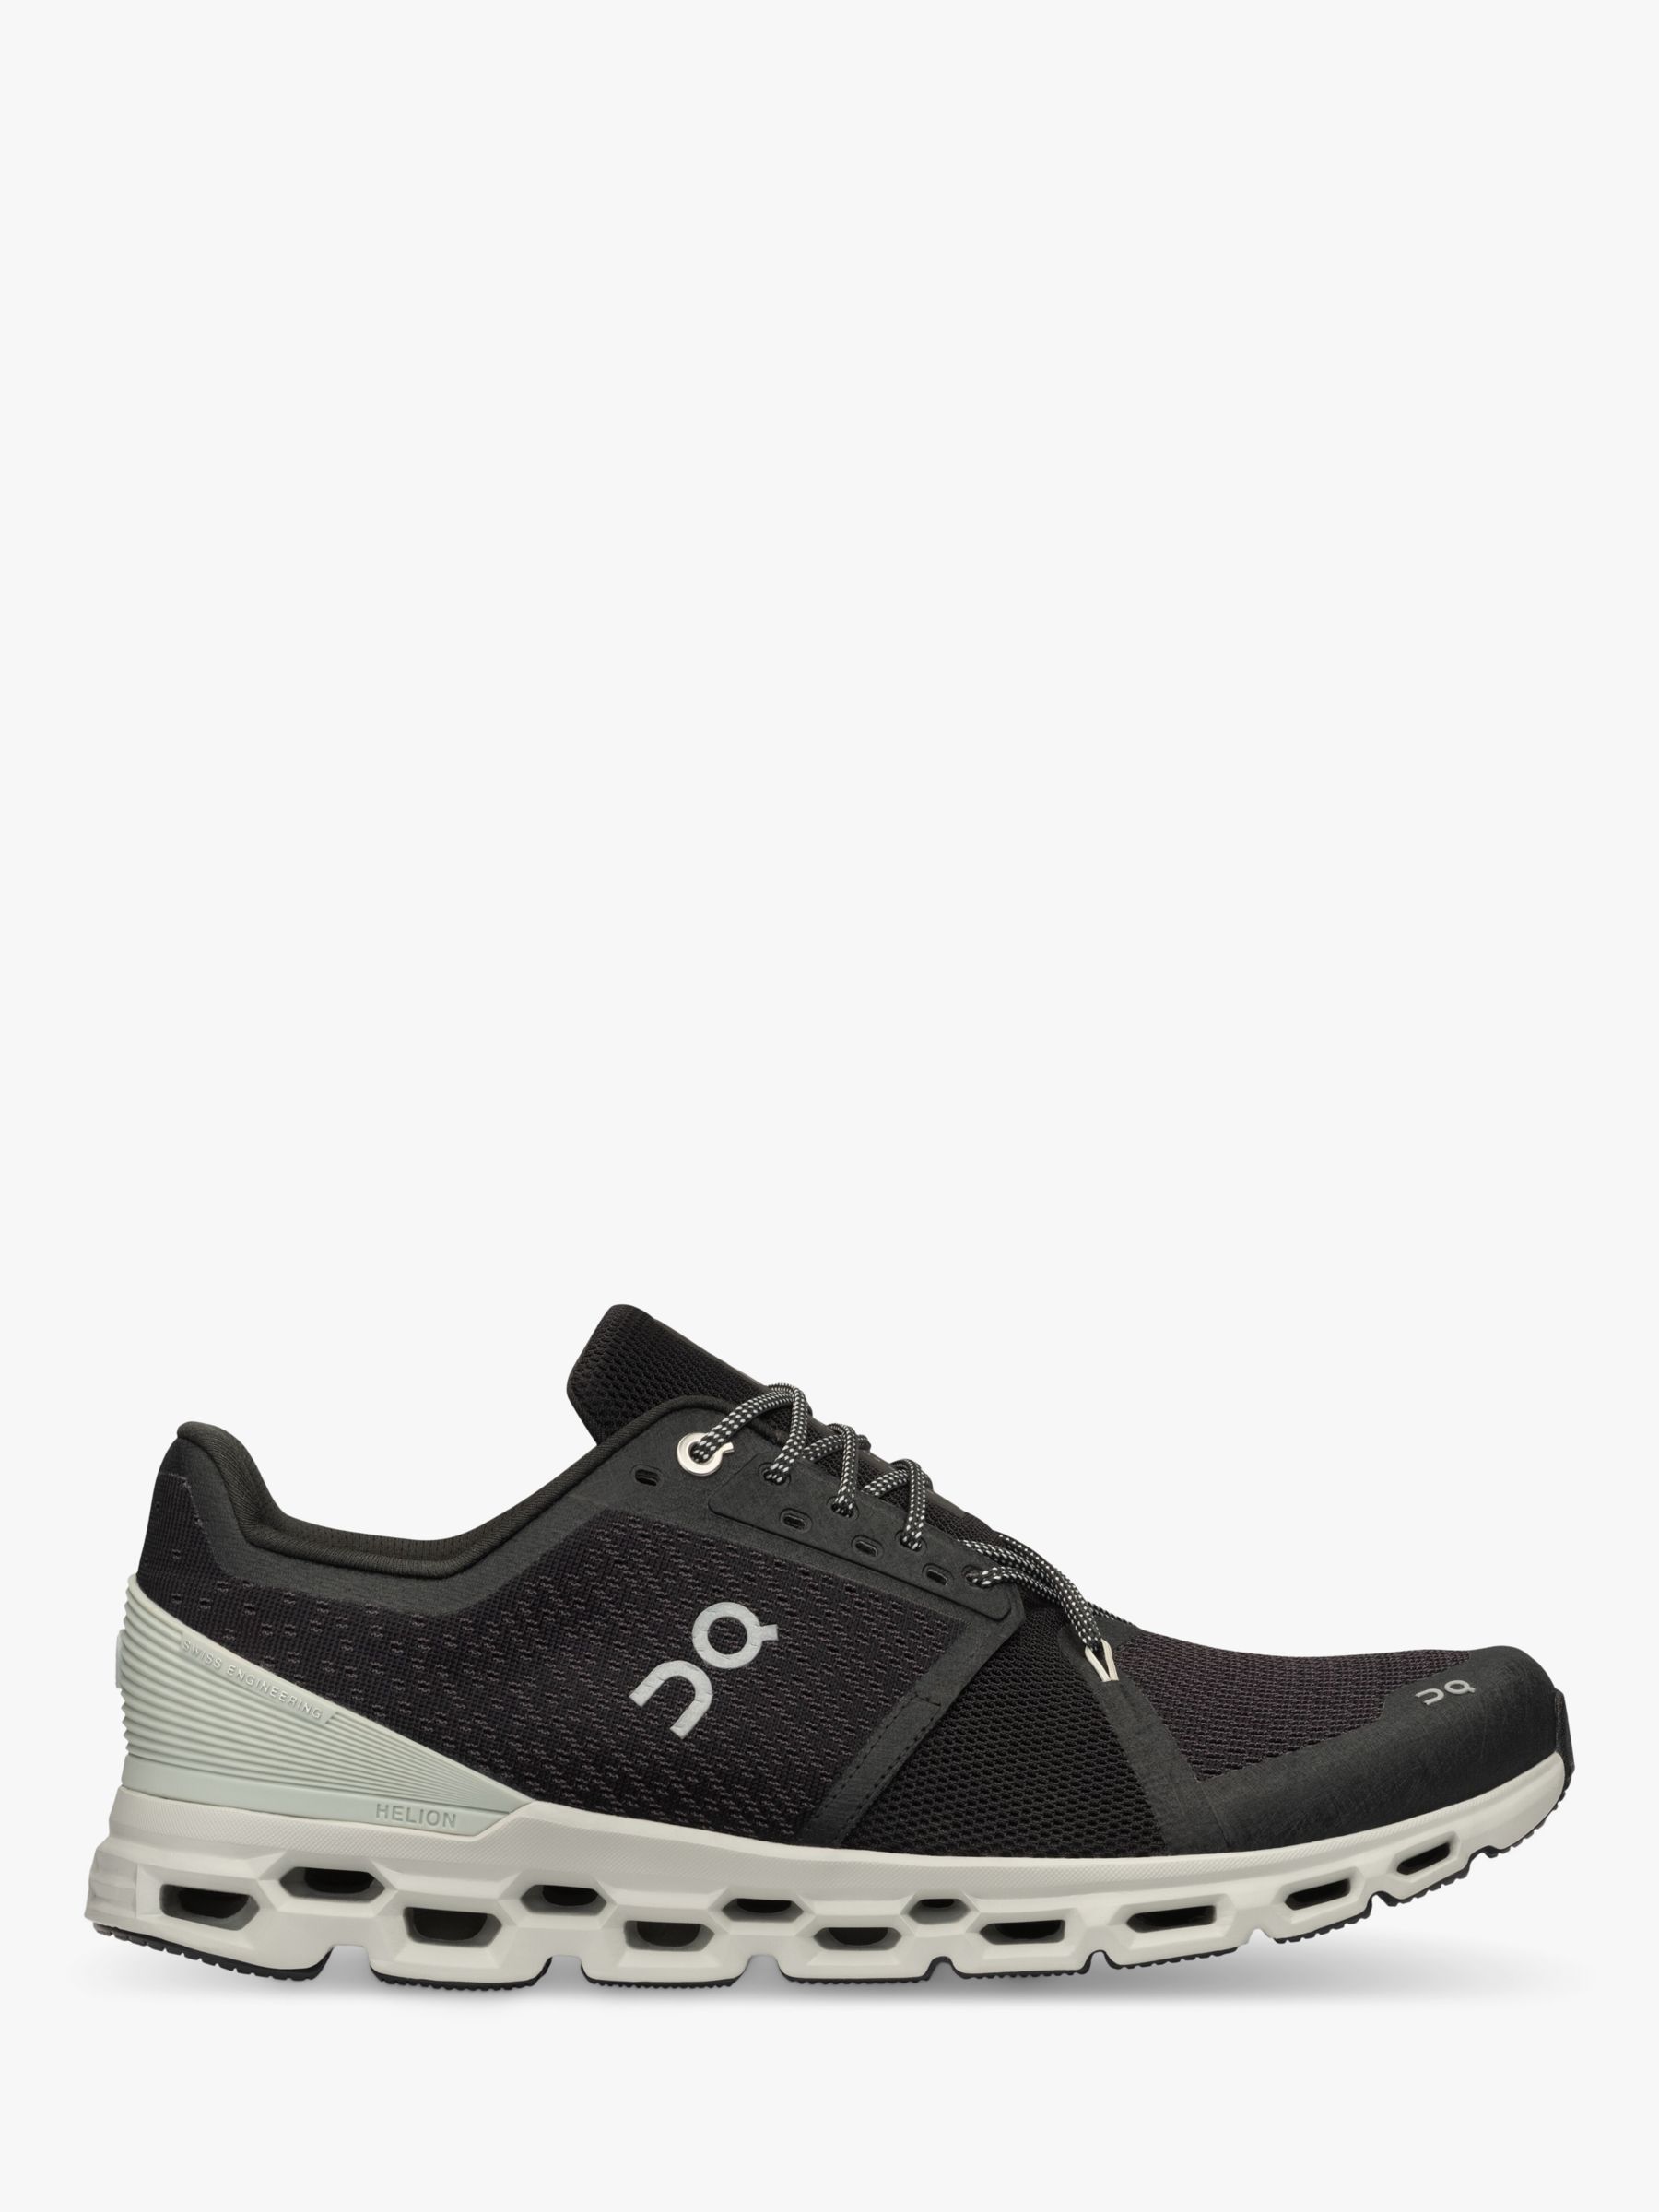 On CloudStratus Men's Running Shoes, Black/Mineral at John Lewis & Partners